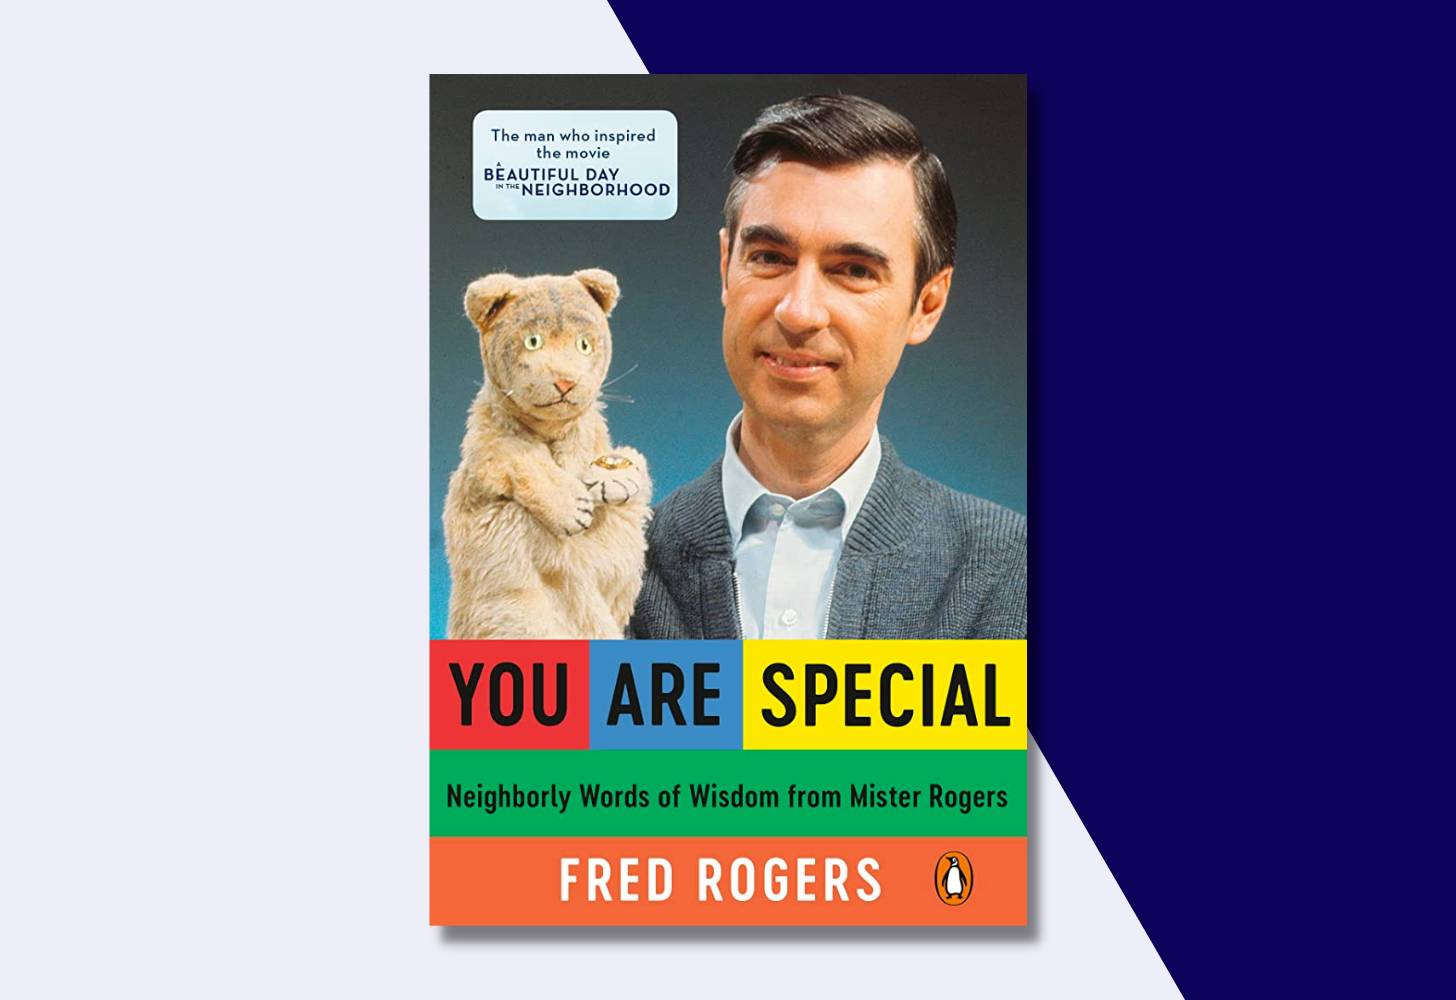 “You Are Special: Neighborly Words of Wisdom from Mister Rogers” by Fred Rogers